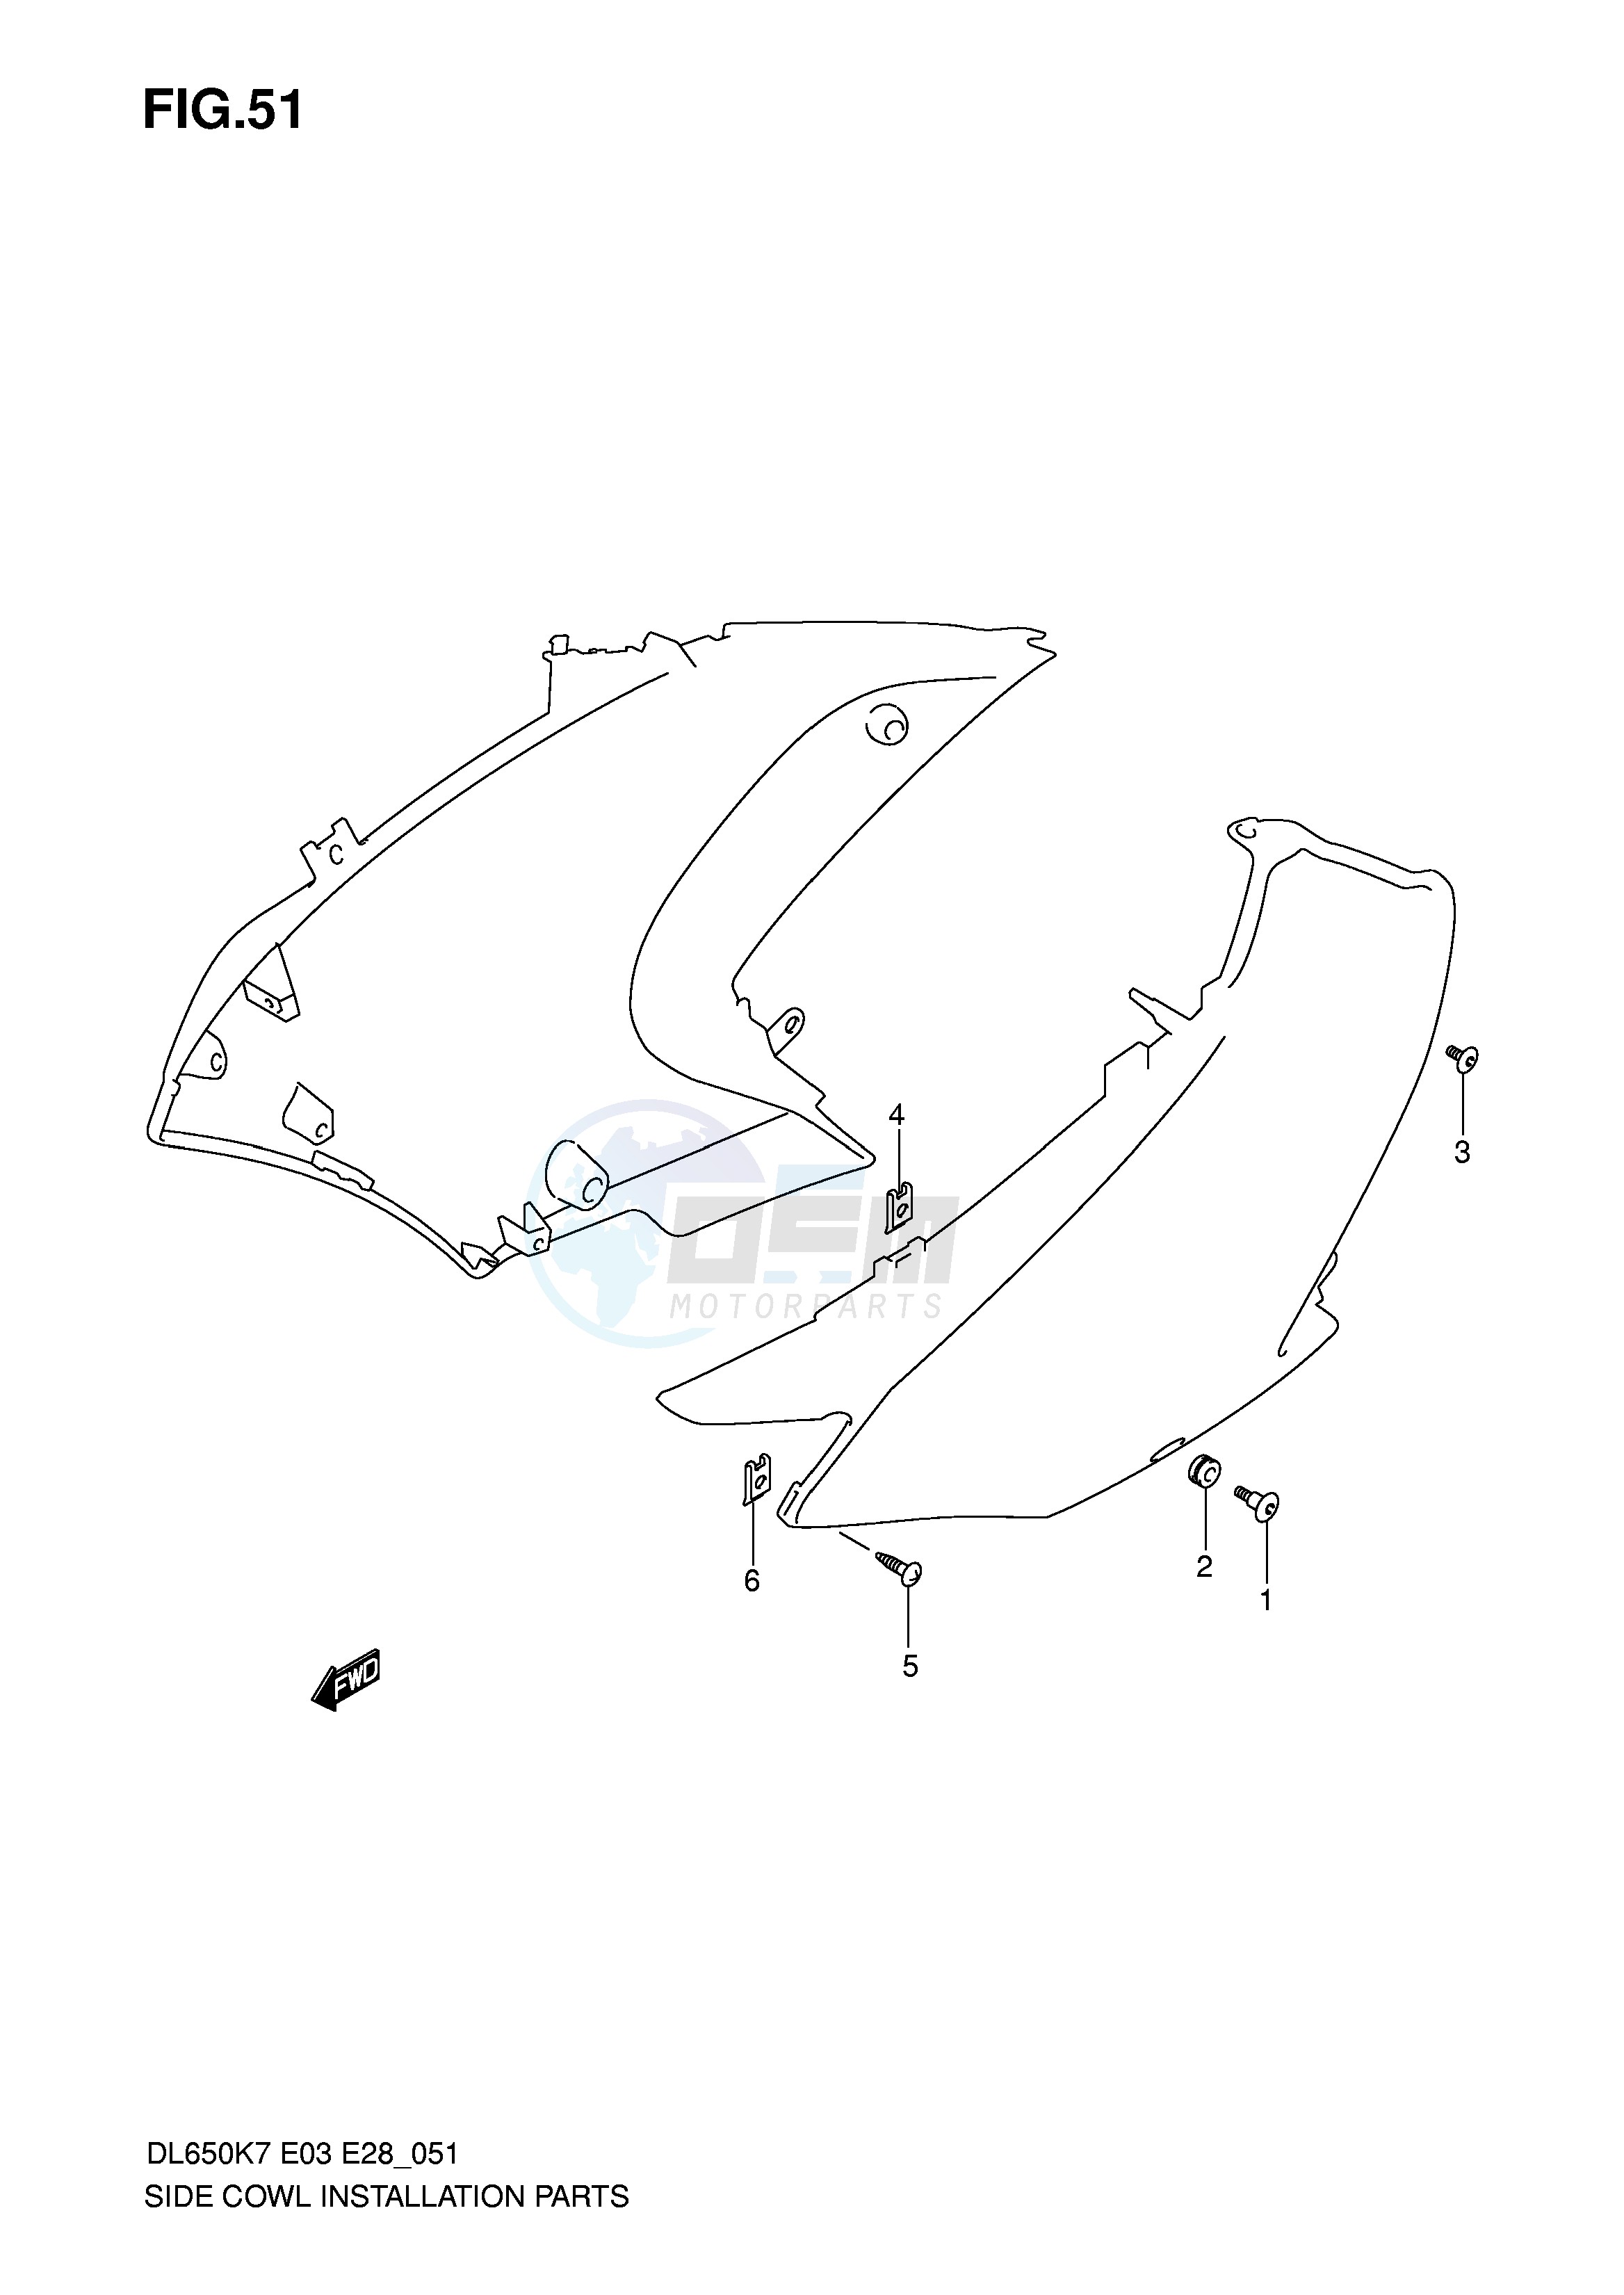 SIDE COWLING INSTALLATION PARTS blueprint